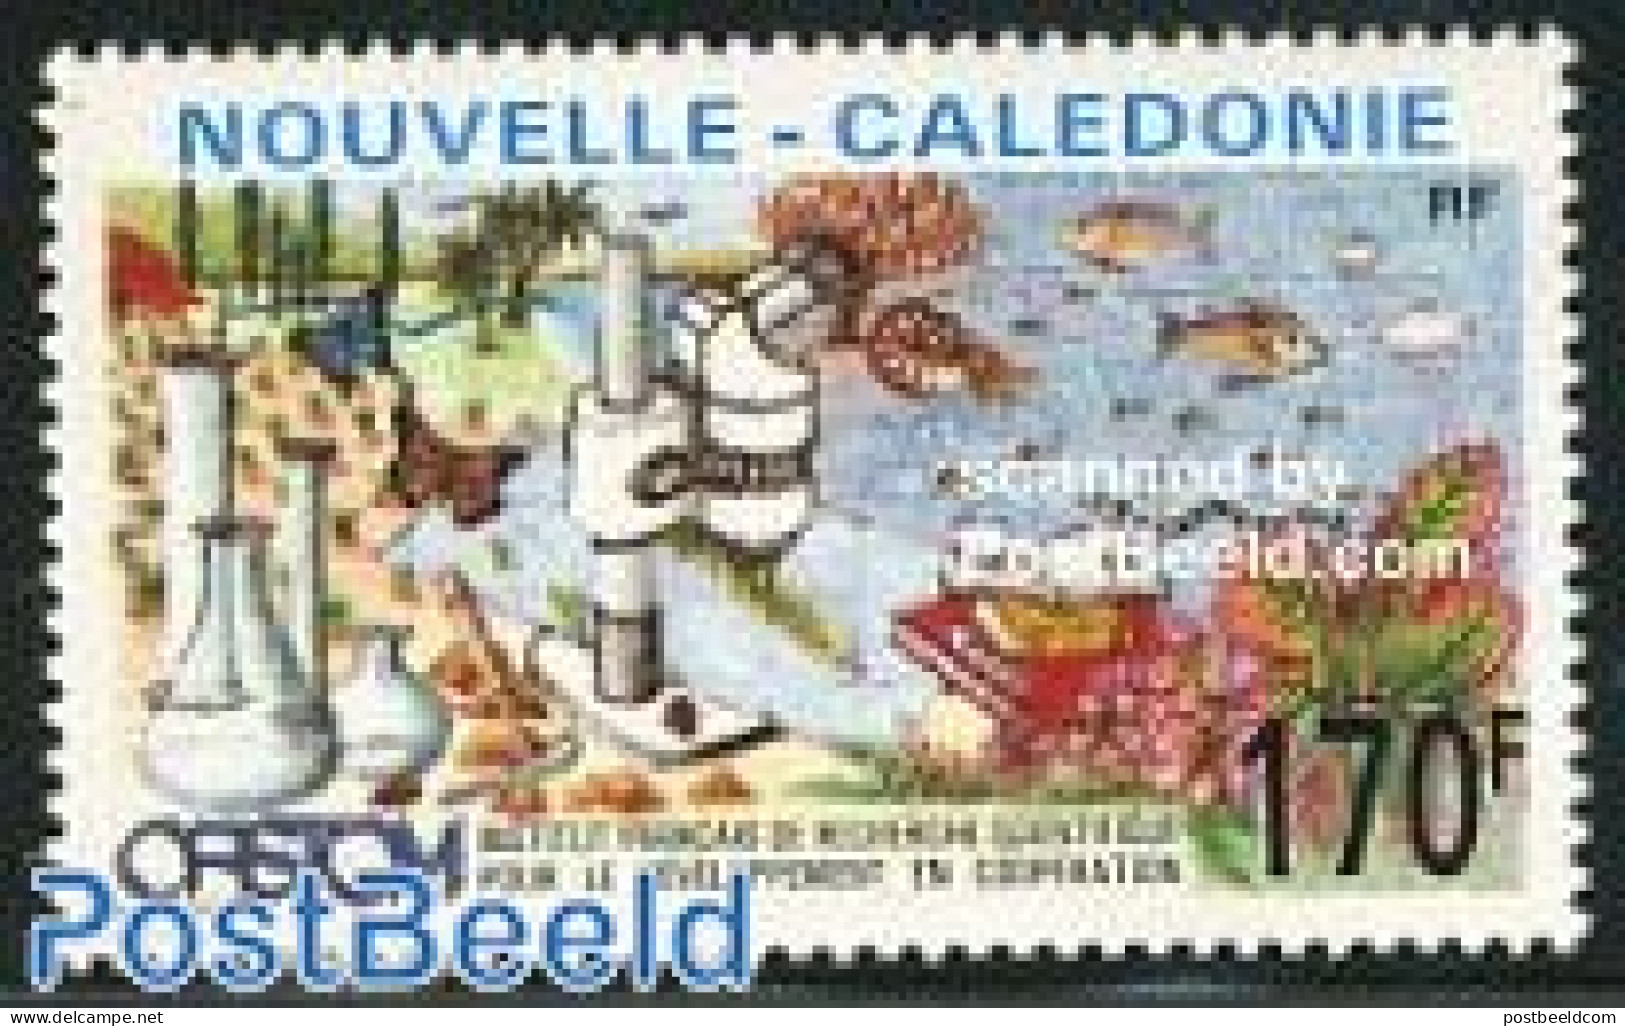 New Caledonia 1991 Science 1v, Mint NH, Nature - Science - Butterflies - Fish - Chemistry & Chemists - Art - Books - Neufs